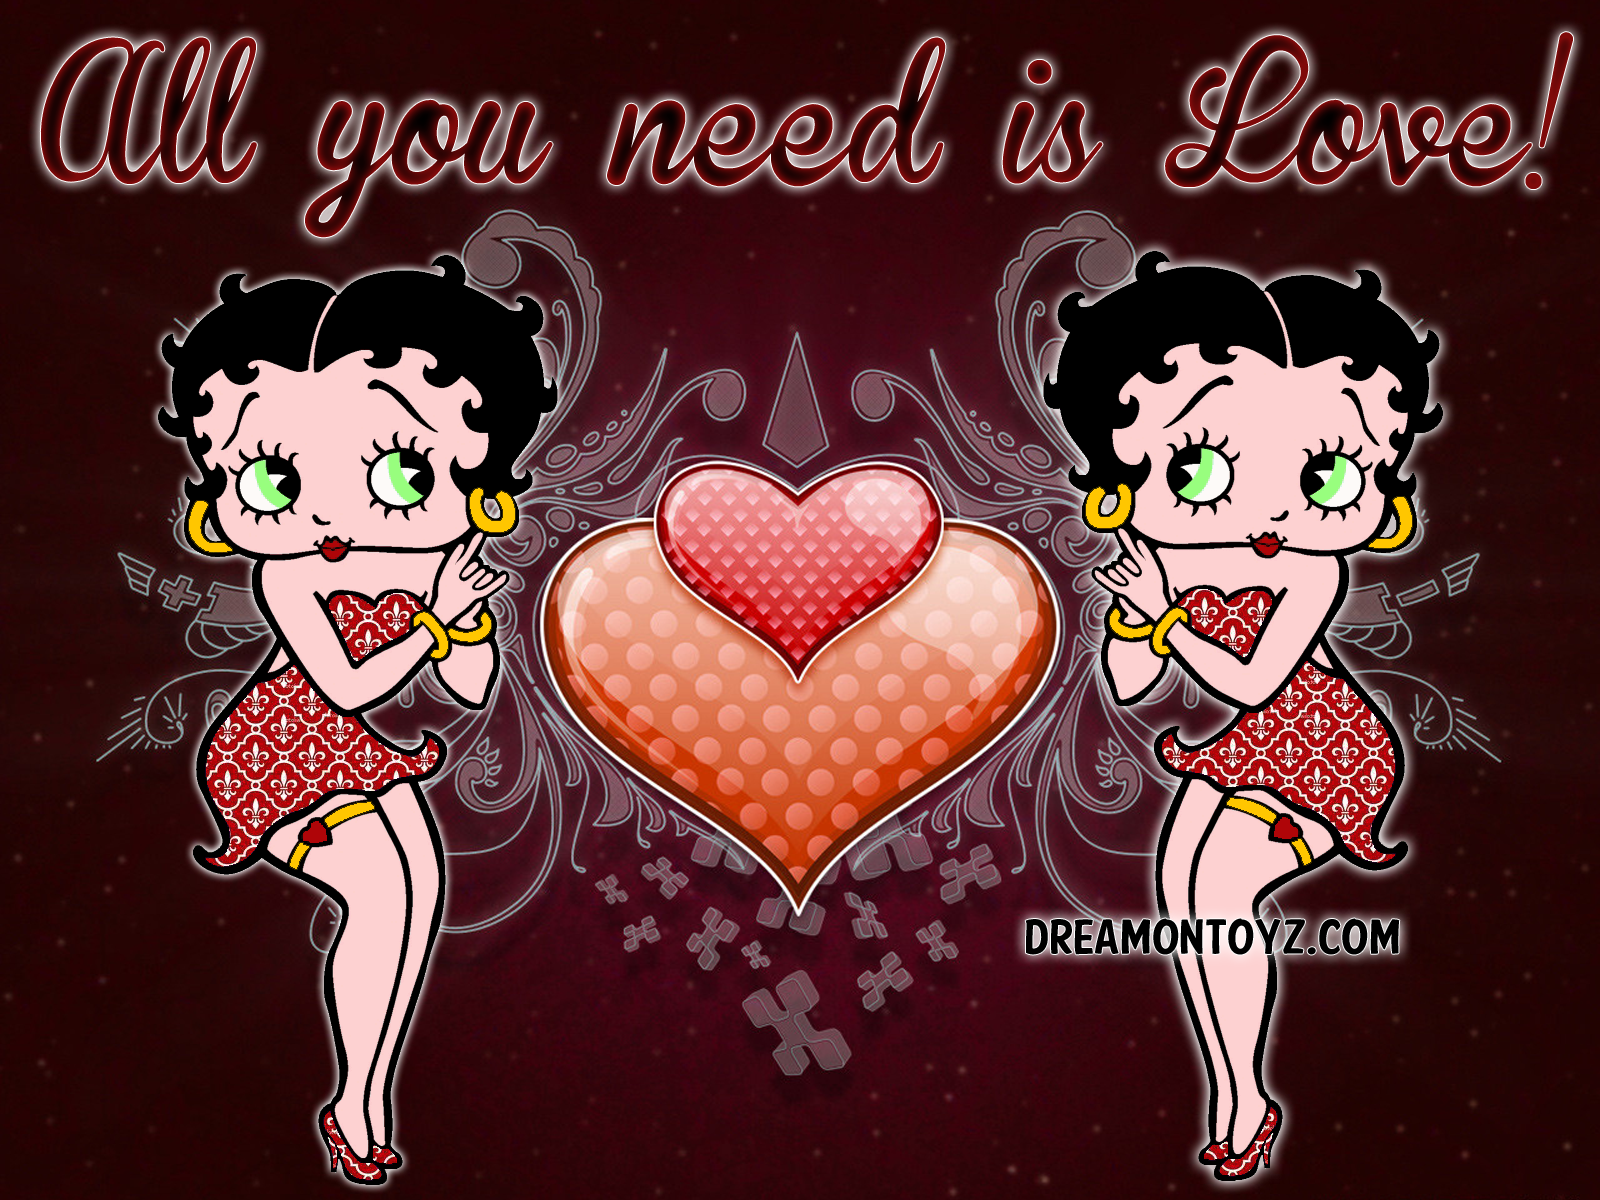 All Holiday Betty Boop Wallpapers 1600x1200. 